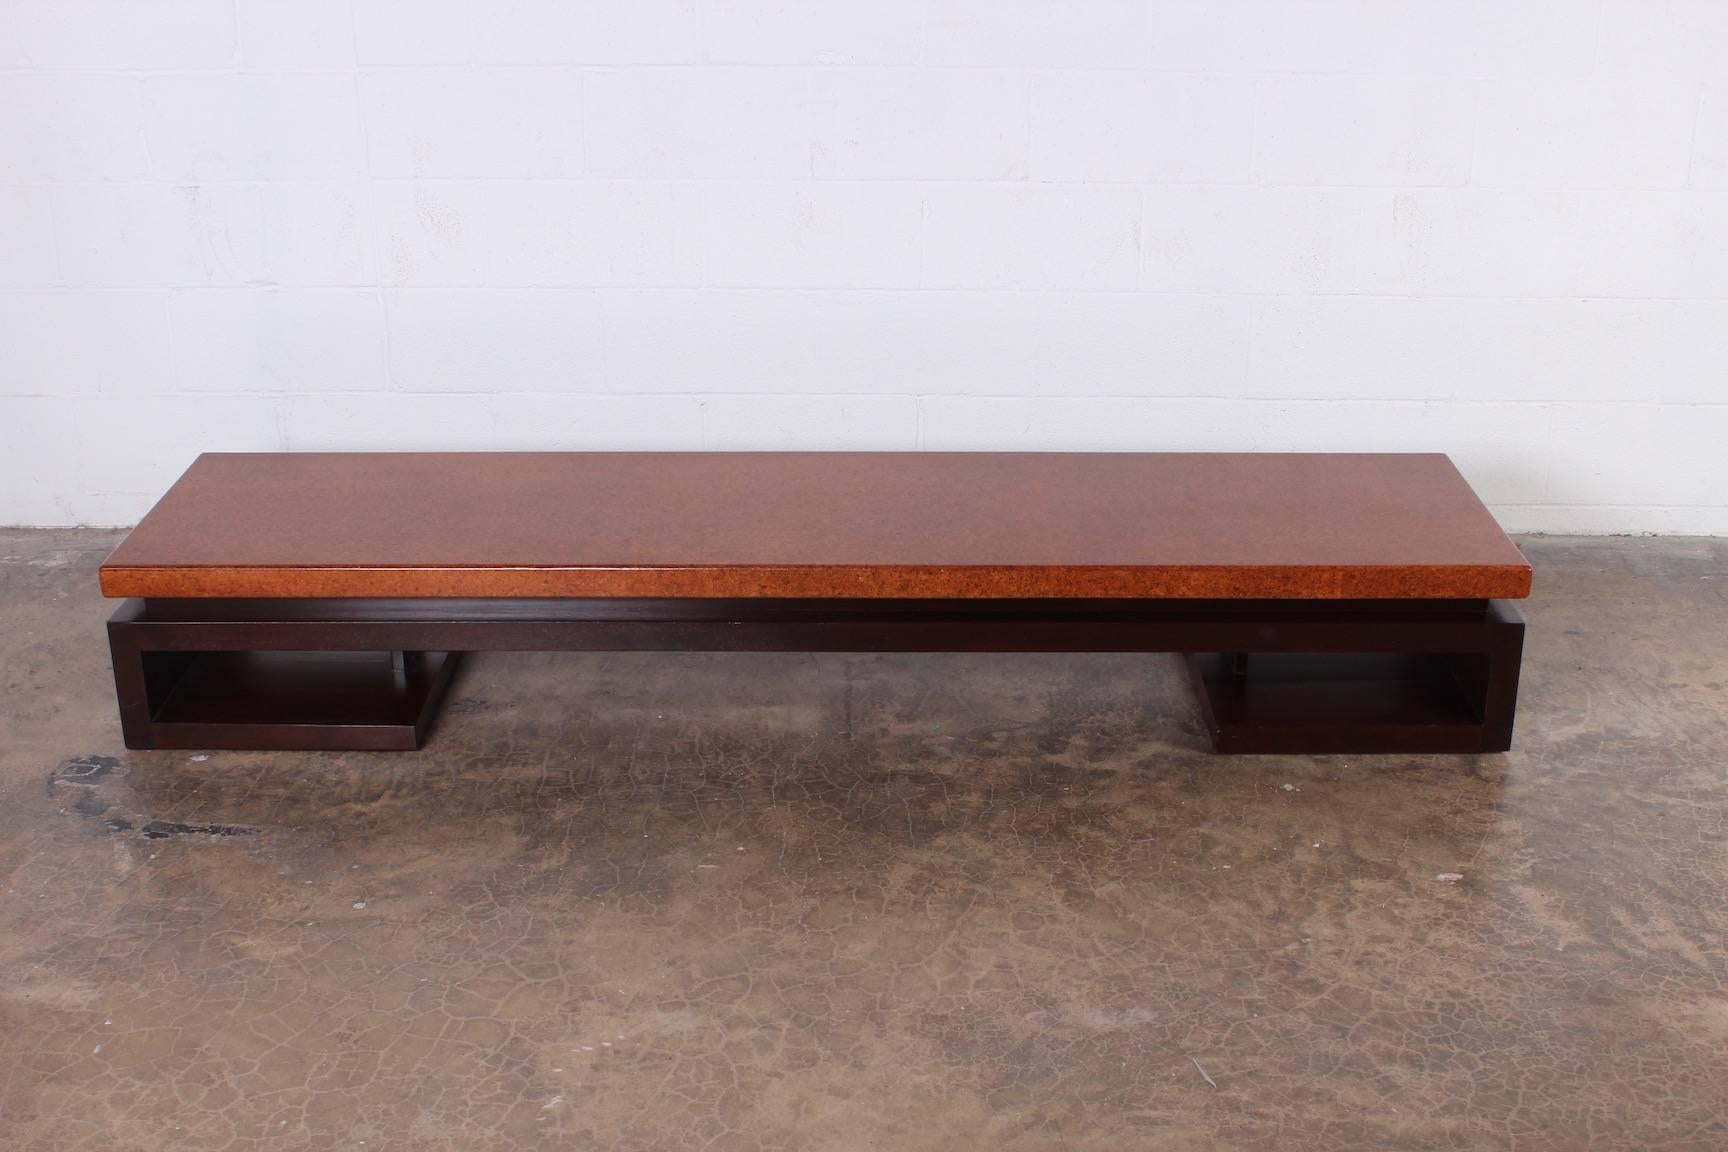 A cork top bench with mahogany base. Designed by Paul Frankl for Johnson furniture.